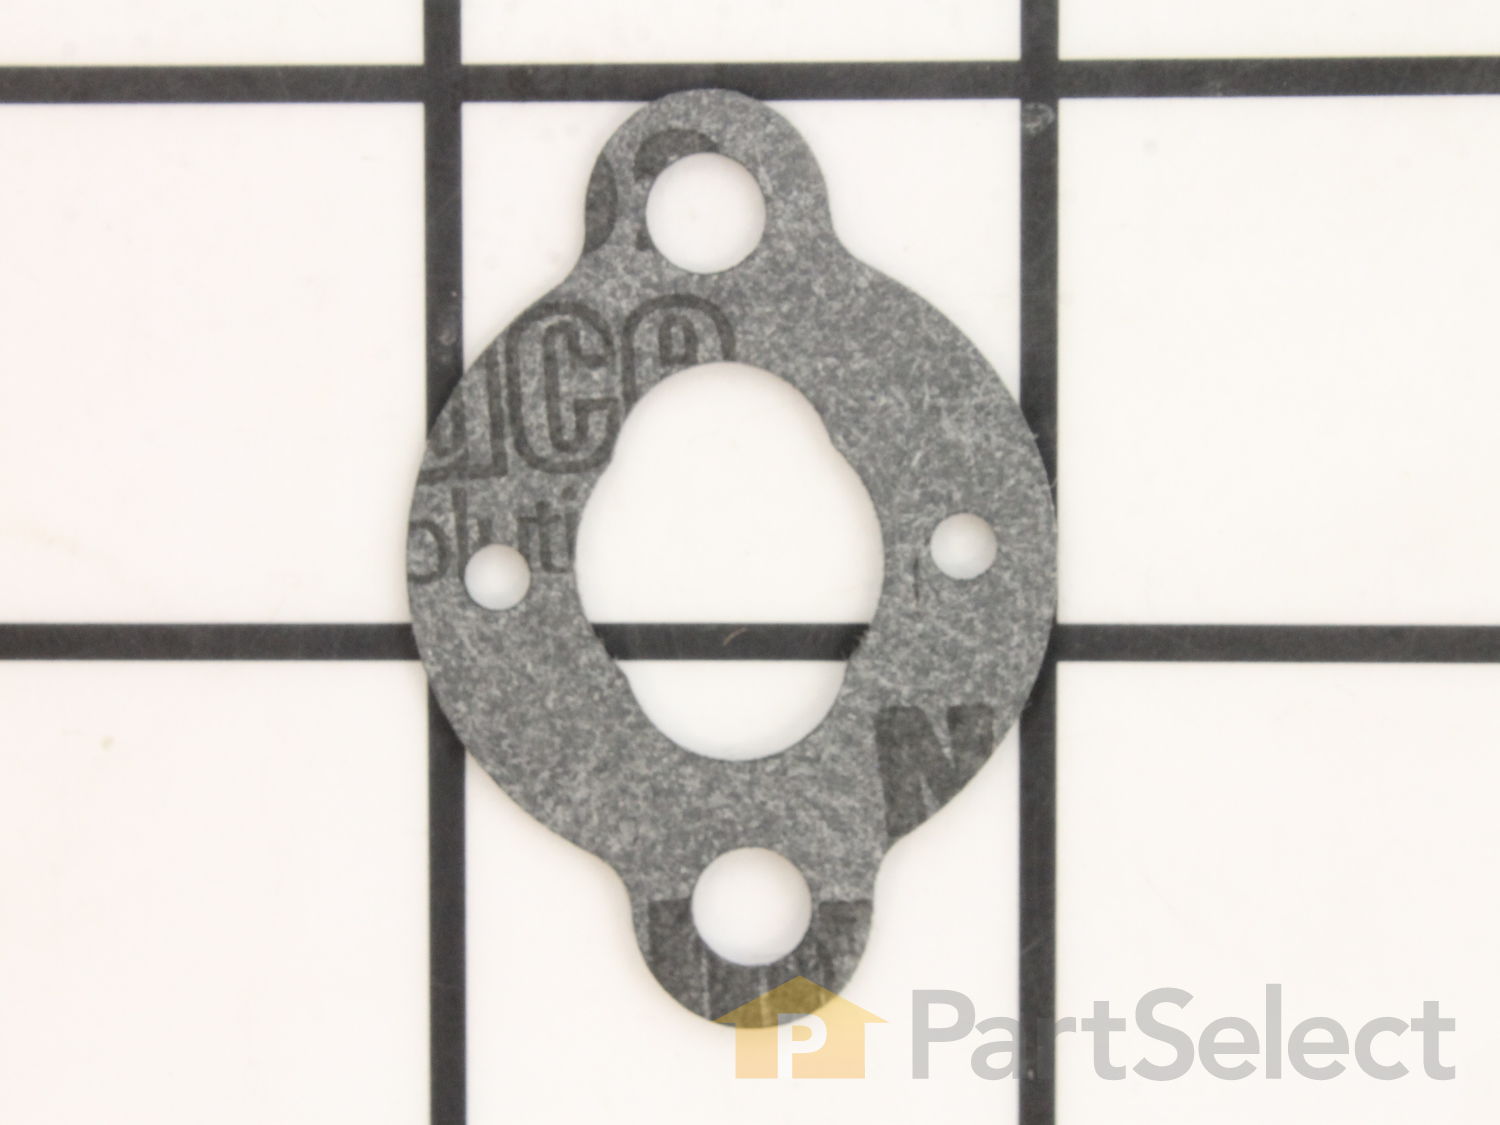 Discounting Online Premium Rubber/Fiber Composition.Made in The USA. 2 Laser-Cut Carburetor Intake Mount Gaskets Replaces Homelite Line String Trimmer Part Number 901551001 